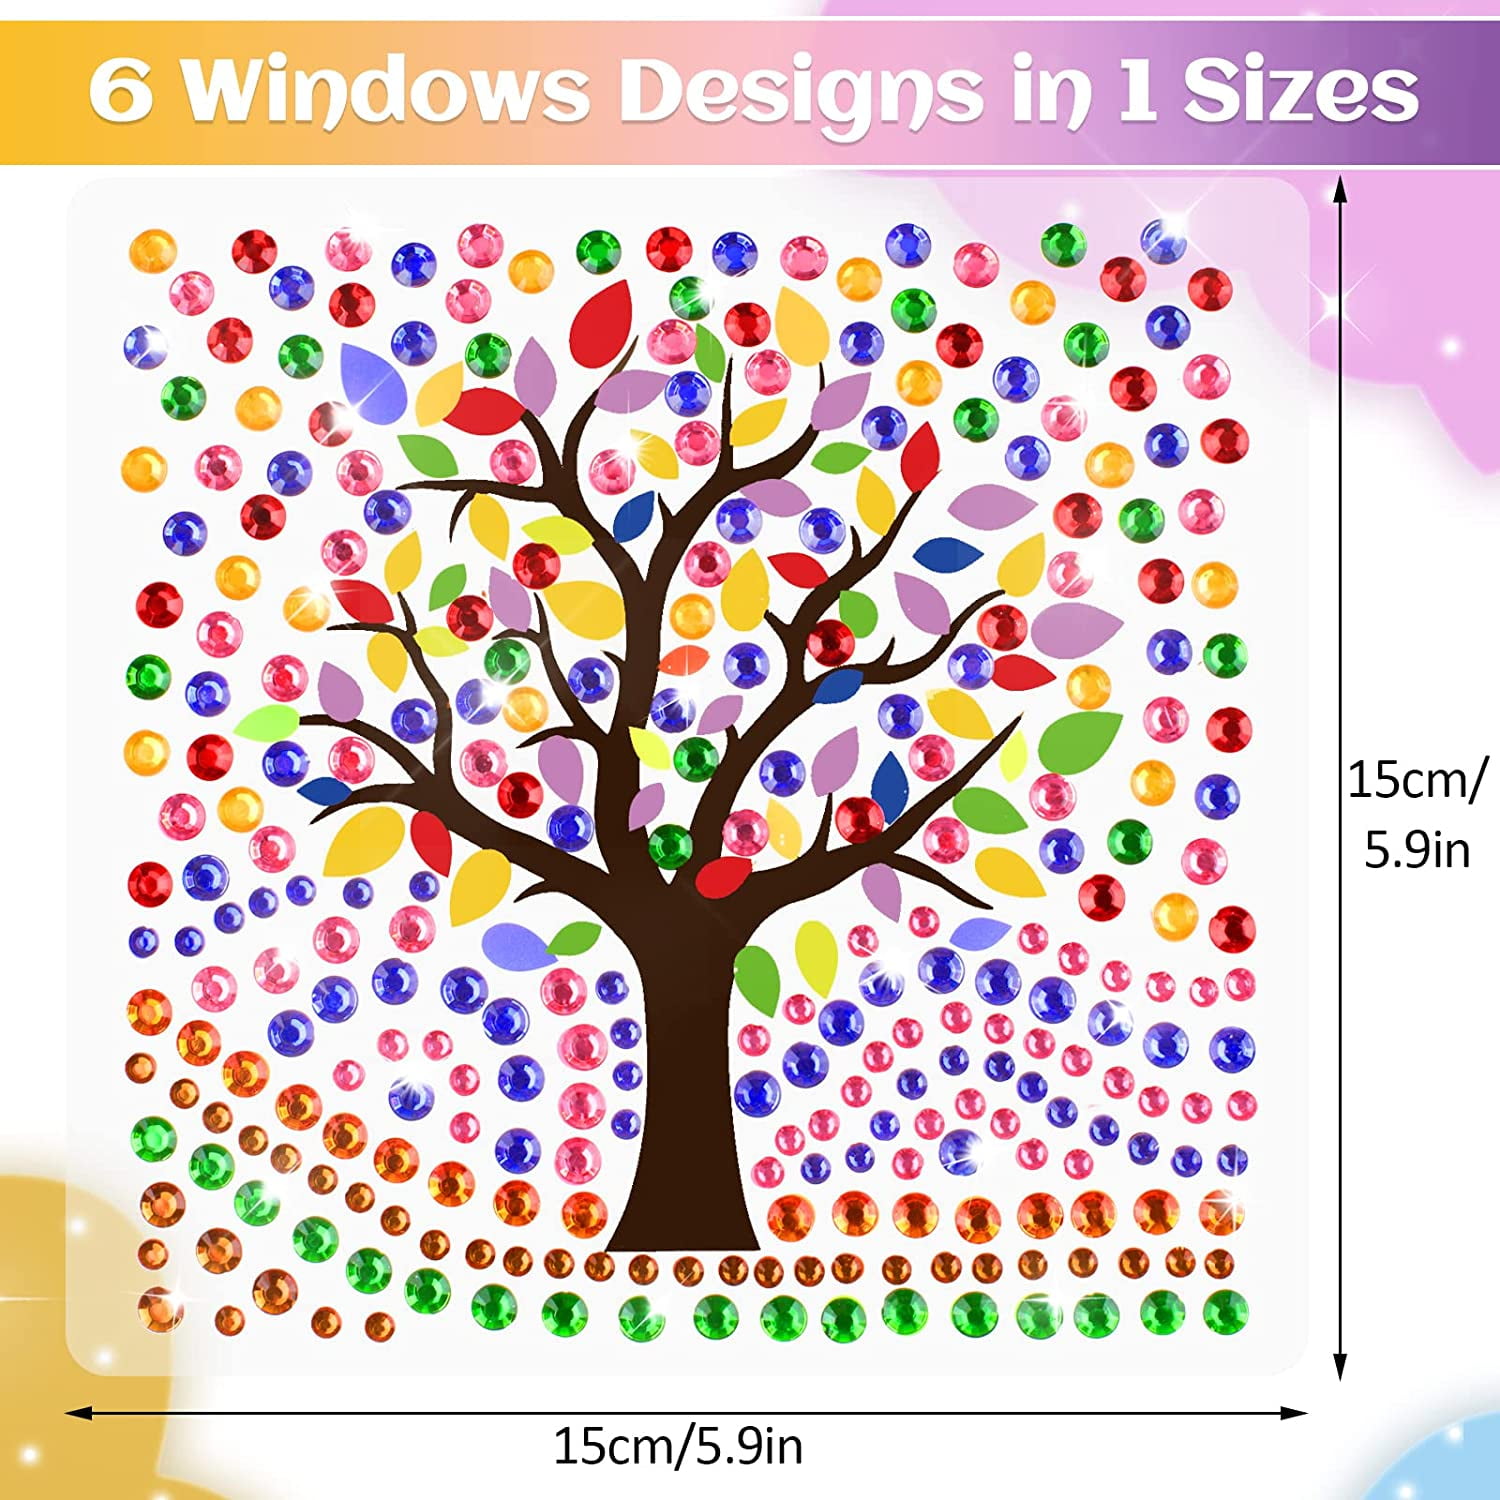 FUMAX Arts and Crafts for Kids Ages 8-12, Big Gem Diamond Gem Window Art,  Suncatcher Kits for Kids, Birthday Gifts for Girls Arts and Crafts Ages 6-8